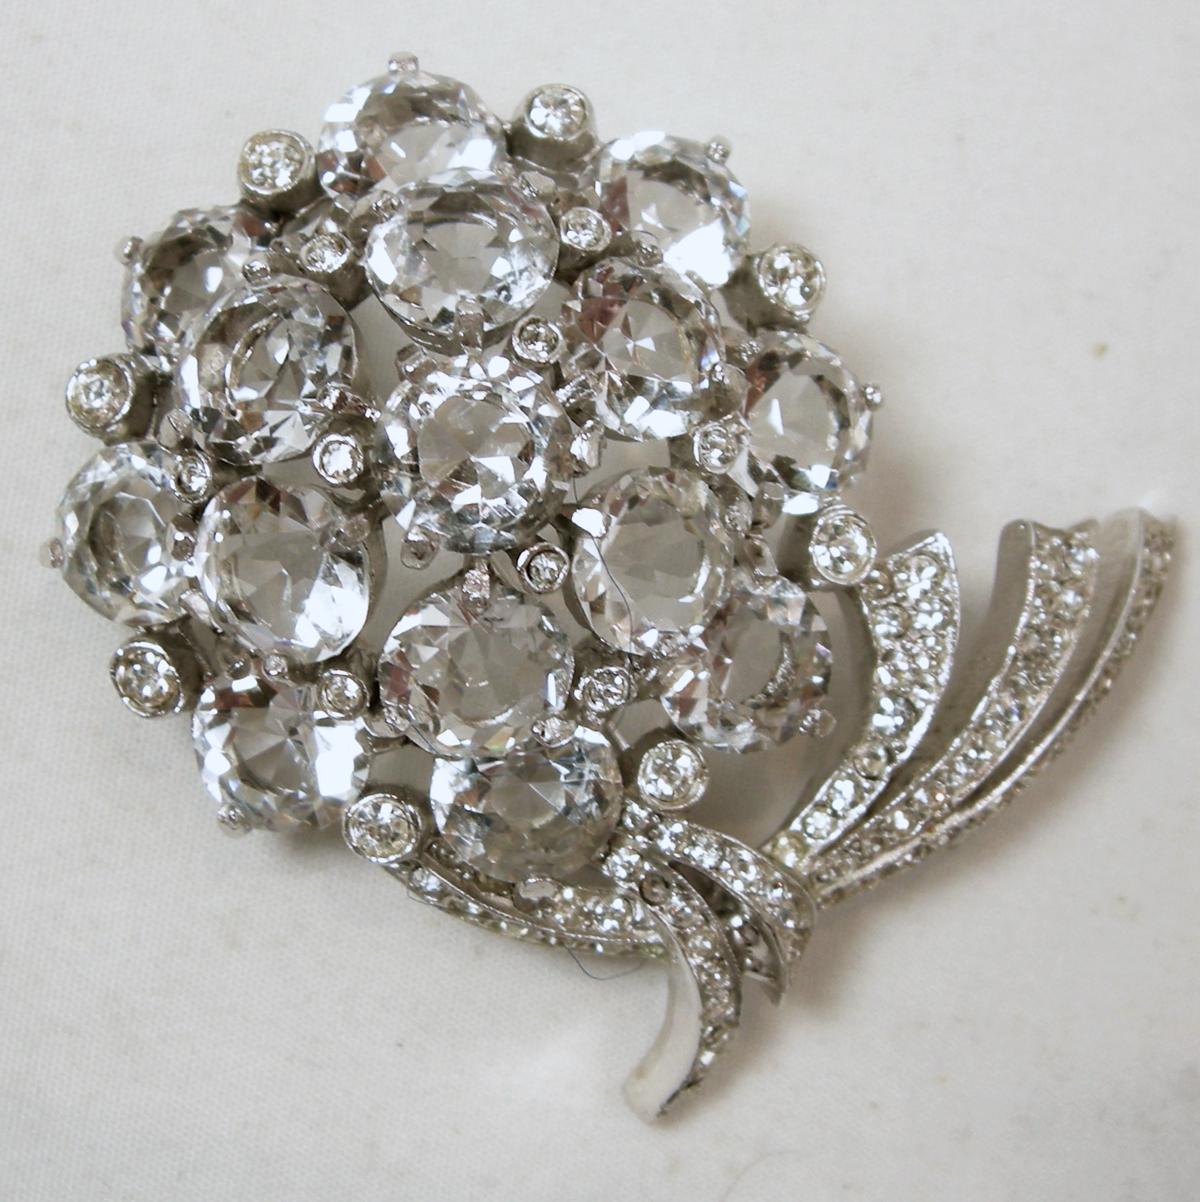 This vintage signed Reja brooch features a floral design with clear crystals in a rhodium silver tone setting.  In excellent condition, this brooch measures 2” x 1-1/2” and is signed “Reja”.